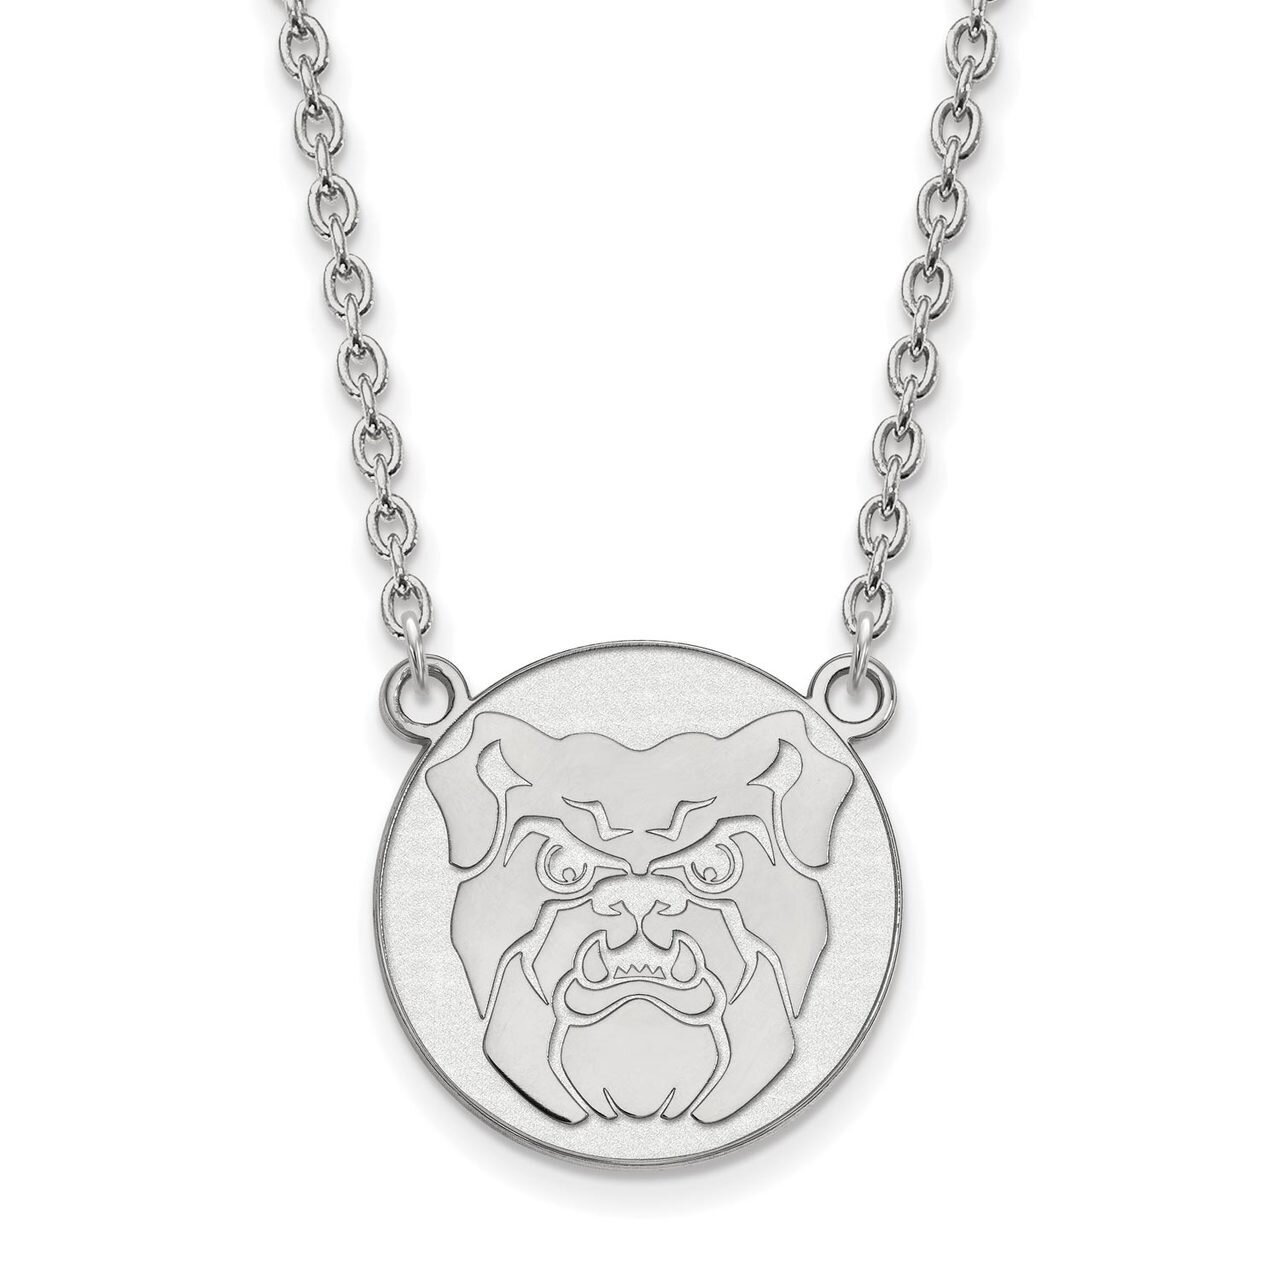 Butler University Large Pendant with Chain Necklace 10k White Gold 1W008BUT-18